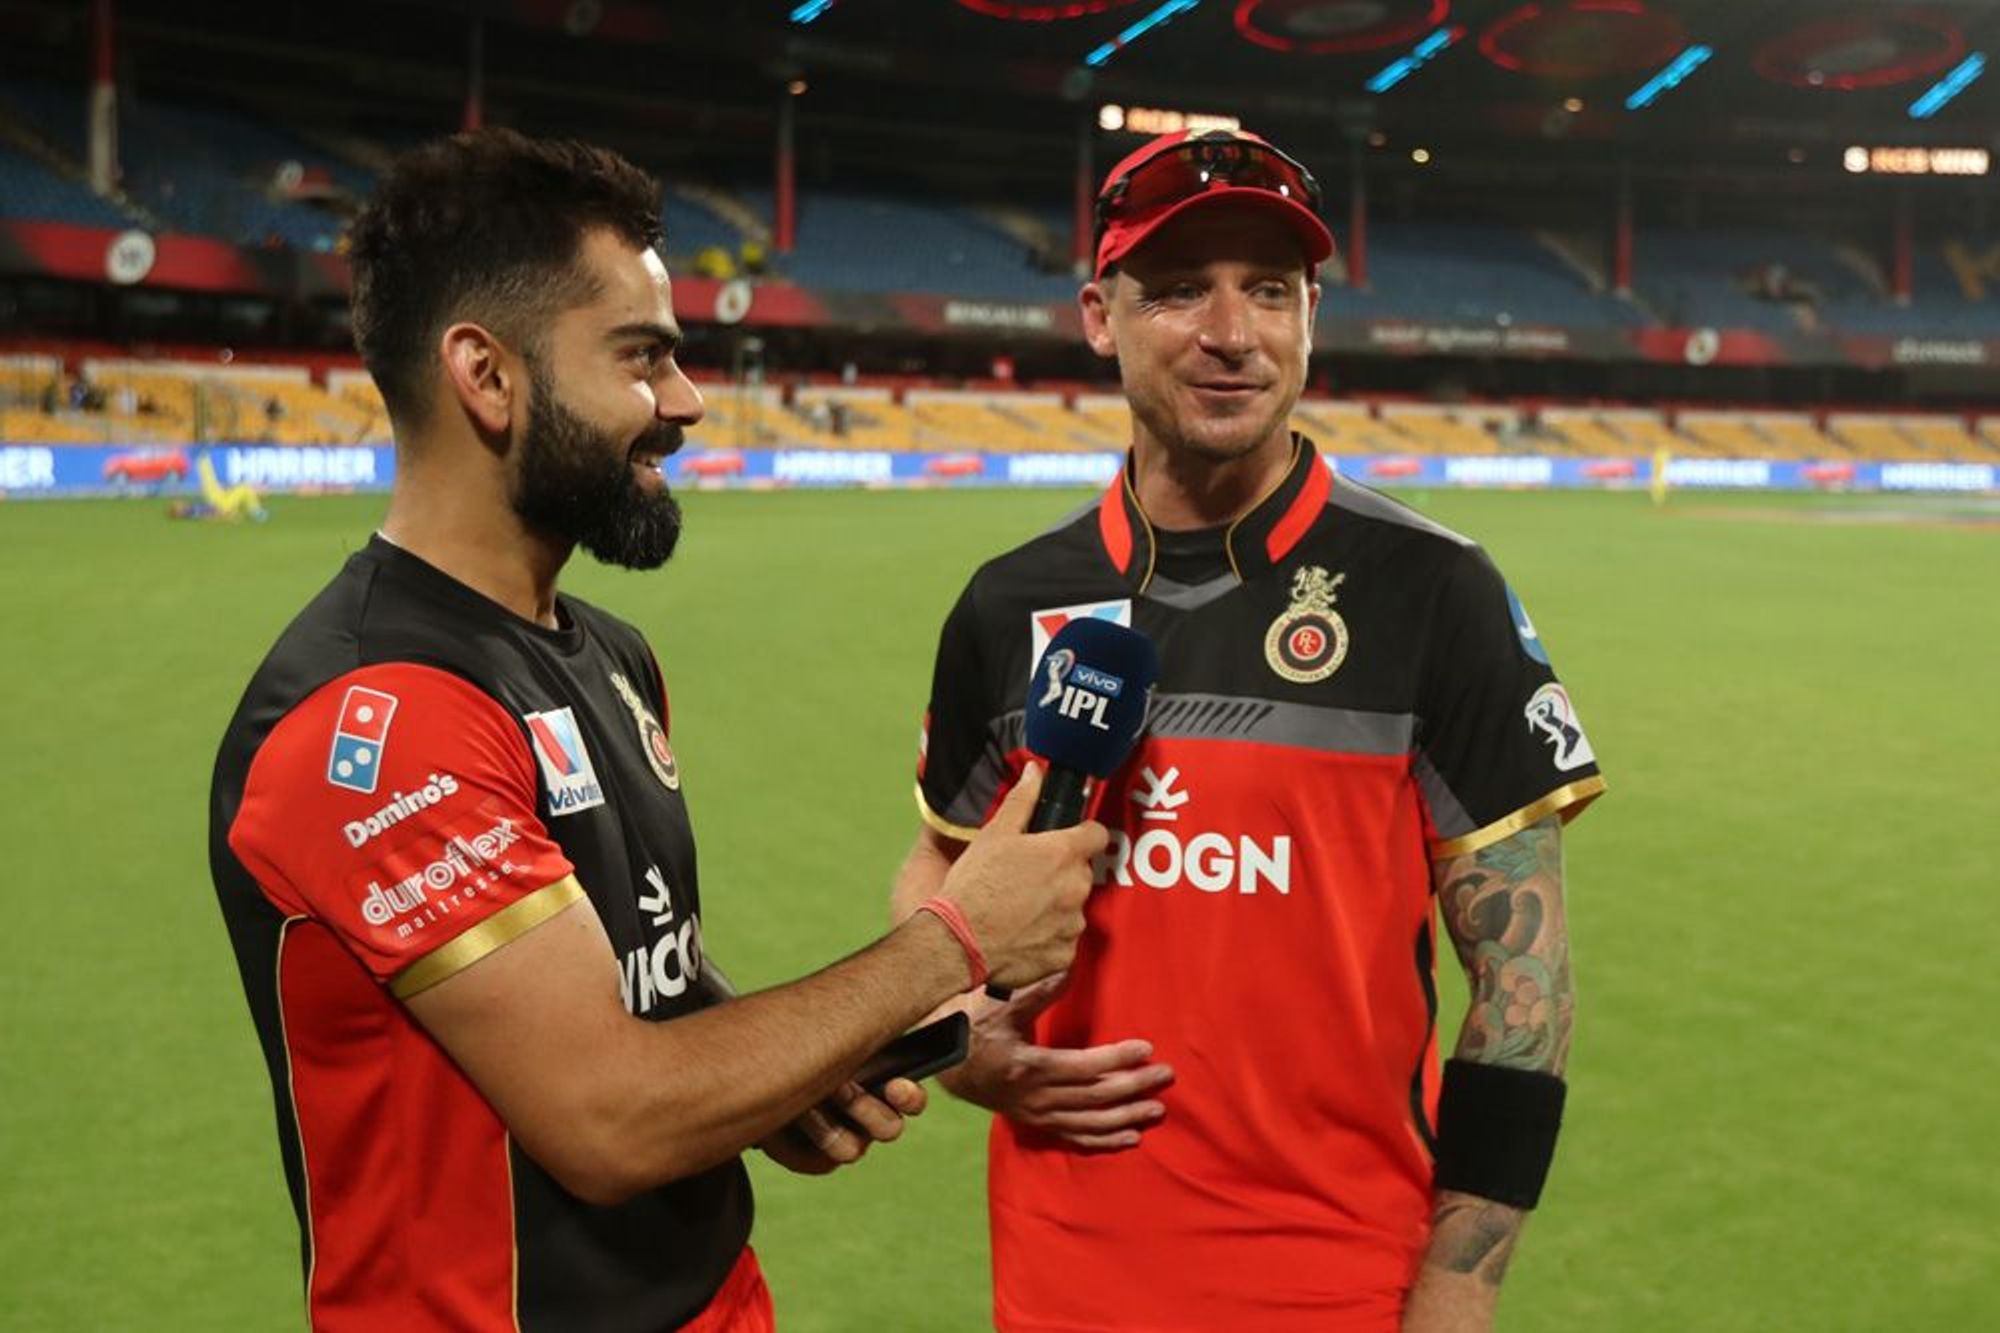 In IPL, there is so much focus on money that cricket gets forgotten unlike PSL, claims Dale Steyn